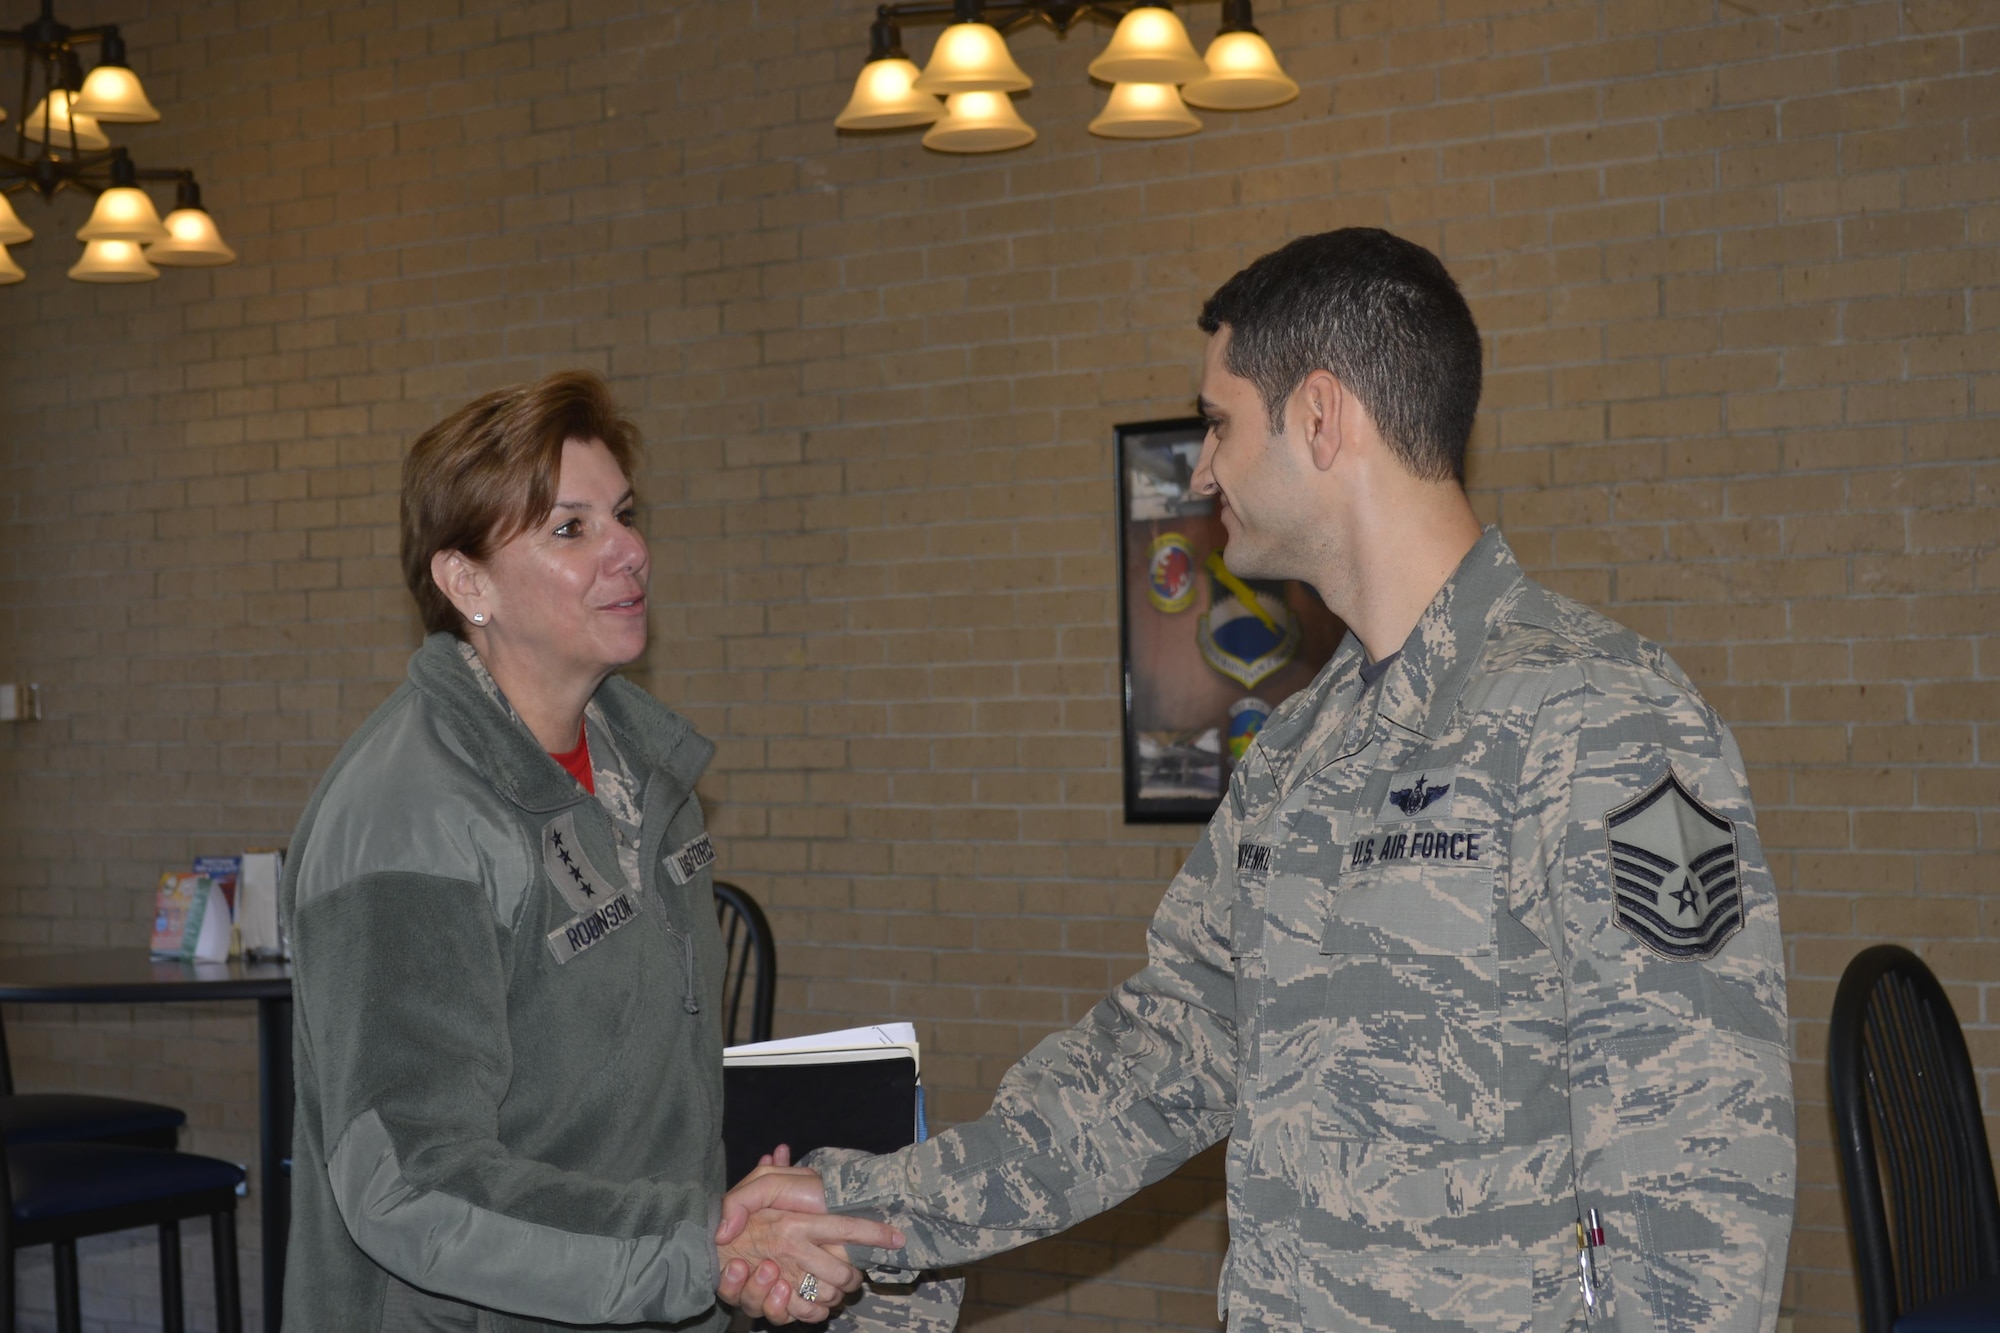 Gen. Lori Robinson, Commander, North American Aerospace Defense Command and United States Northern Command, greets Master Sgt. Samvel Korniyenko, 601st Air Operations Center, at an Airman’s breakfast event here Feb 10. Throughout her Feb. 9-10 visit to the Continental U.S. North American Aerospace Defense Command Region-1st Air Force (Air Forces Northern) enterprise, Robinson talked with organization members about her priorities and expressed her deep appreciation for their professionalism and unwavering commitment to the CONR-1st AF (AFNORTH) mission. (Photo by Mary McHale)